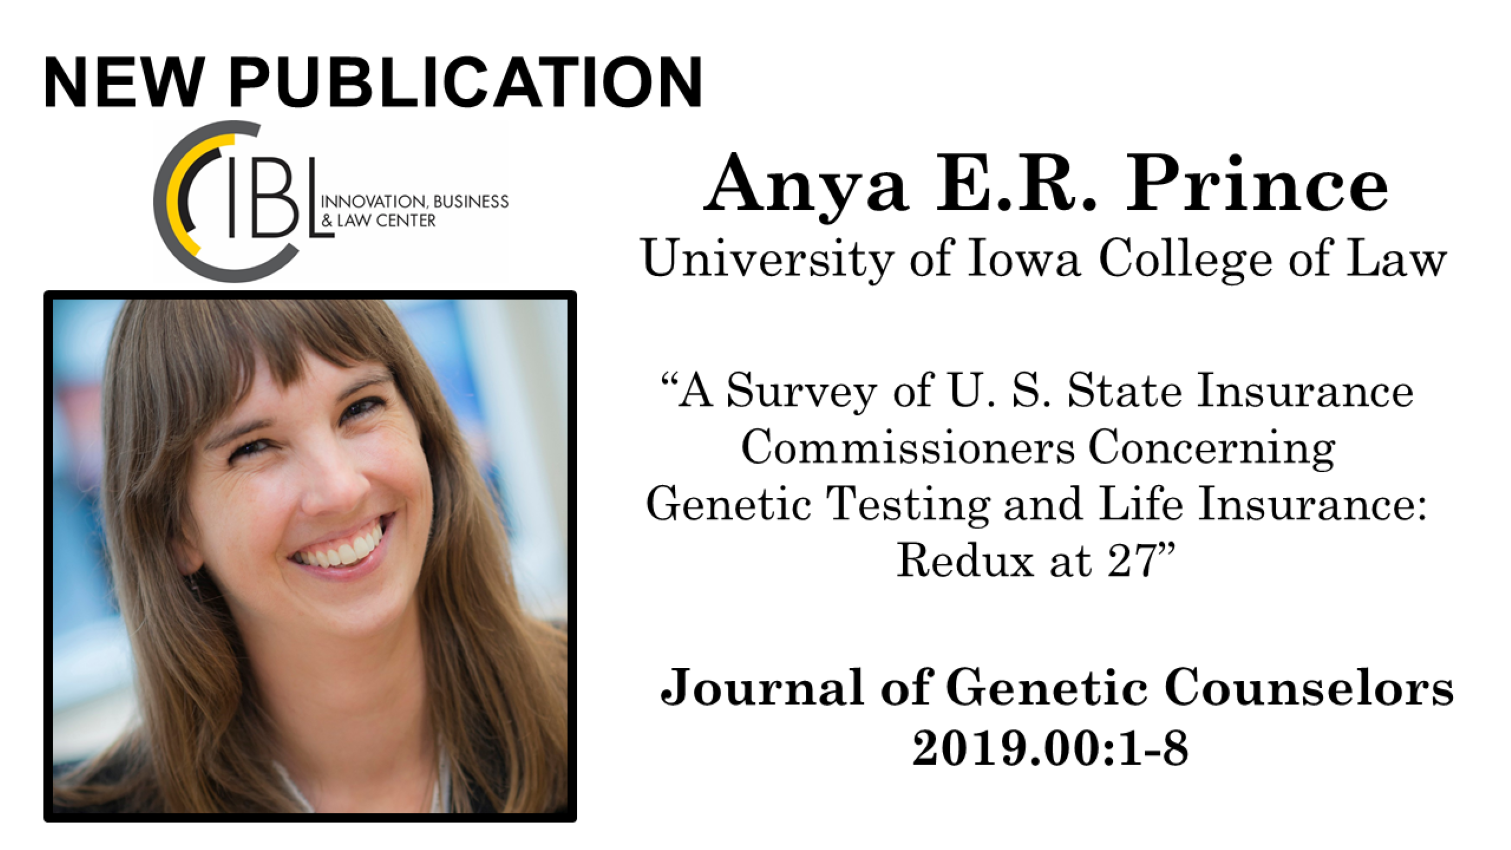 Anya E.R. Prince. University of Iowa College of Law. "A Survey of U.S. State Insurance Commissioners Concerning Genetic Testing and Life Insurance: Redux at 27". Journal of Genetic Counselors 2019.00:1-8